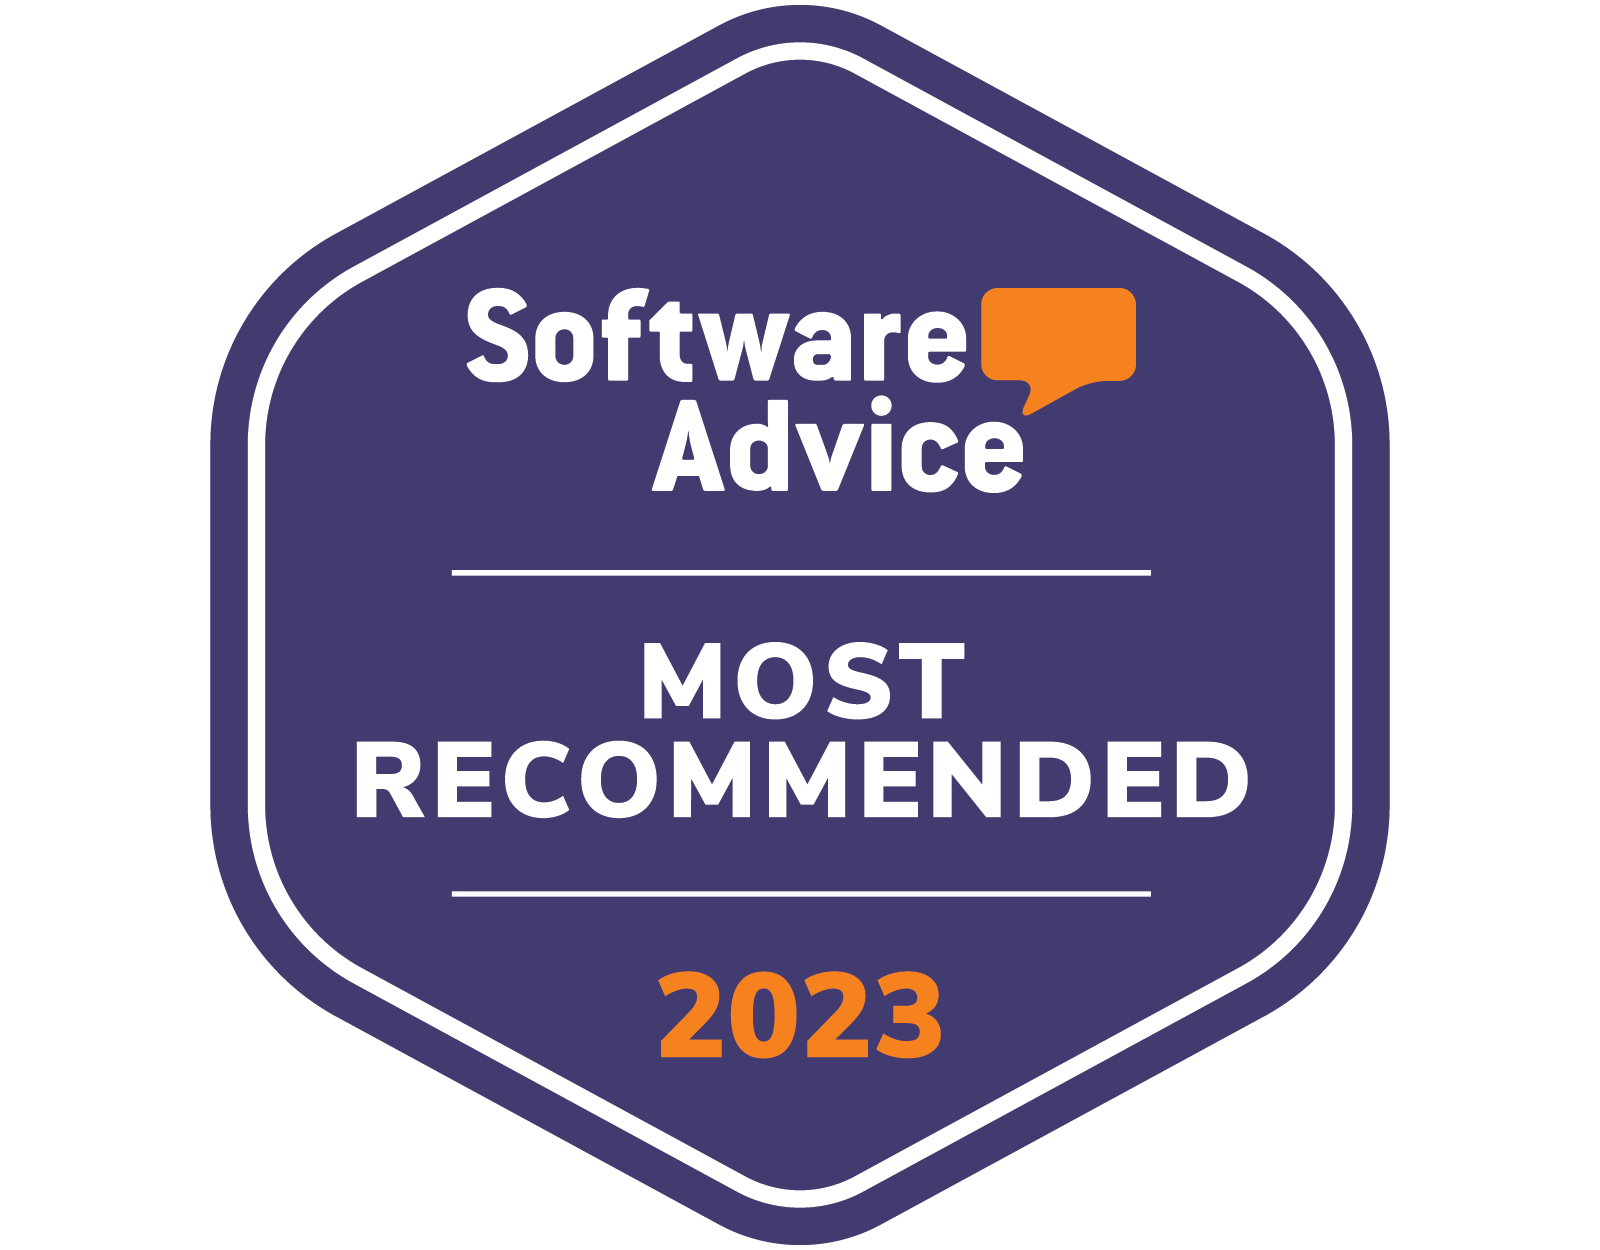 2023 Most Recommended - Software Advice